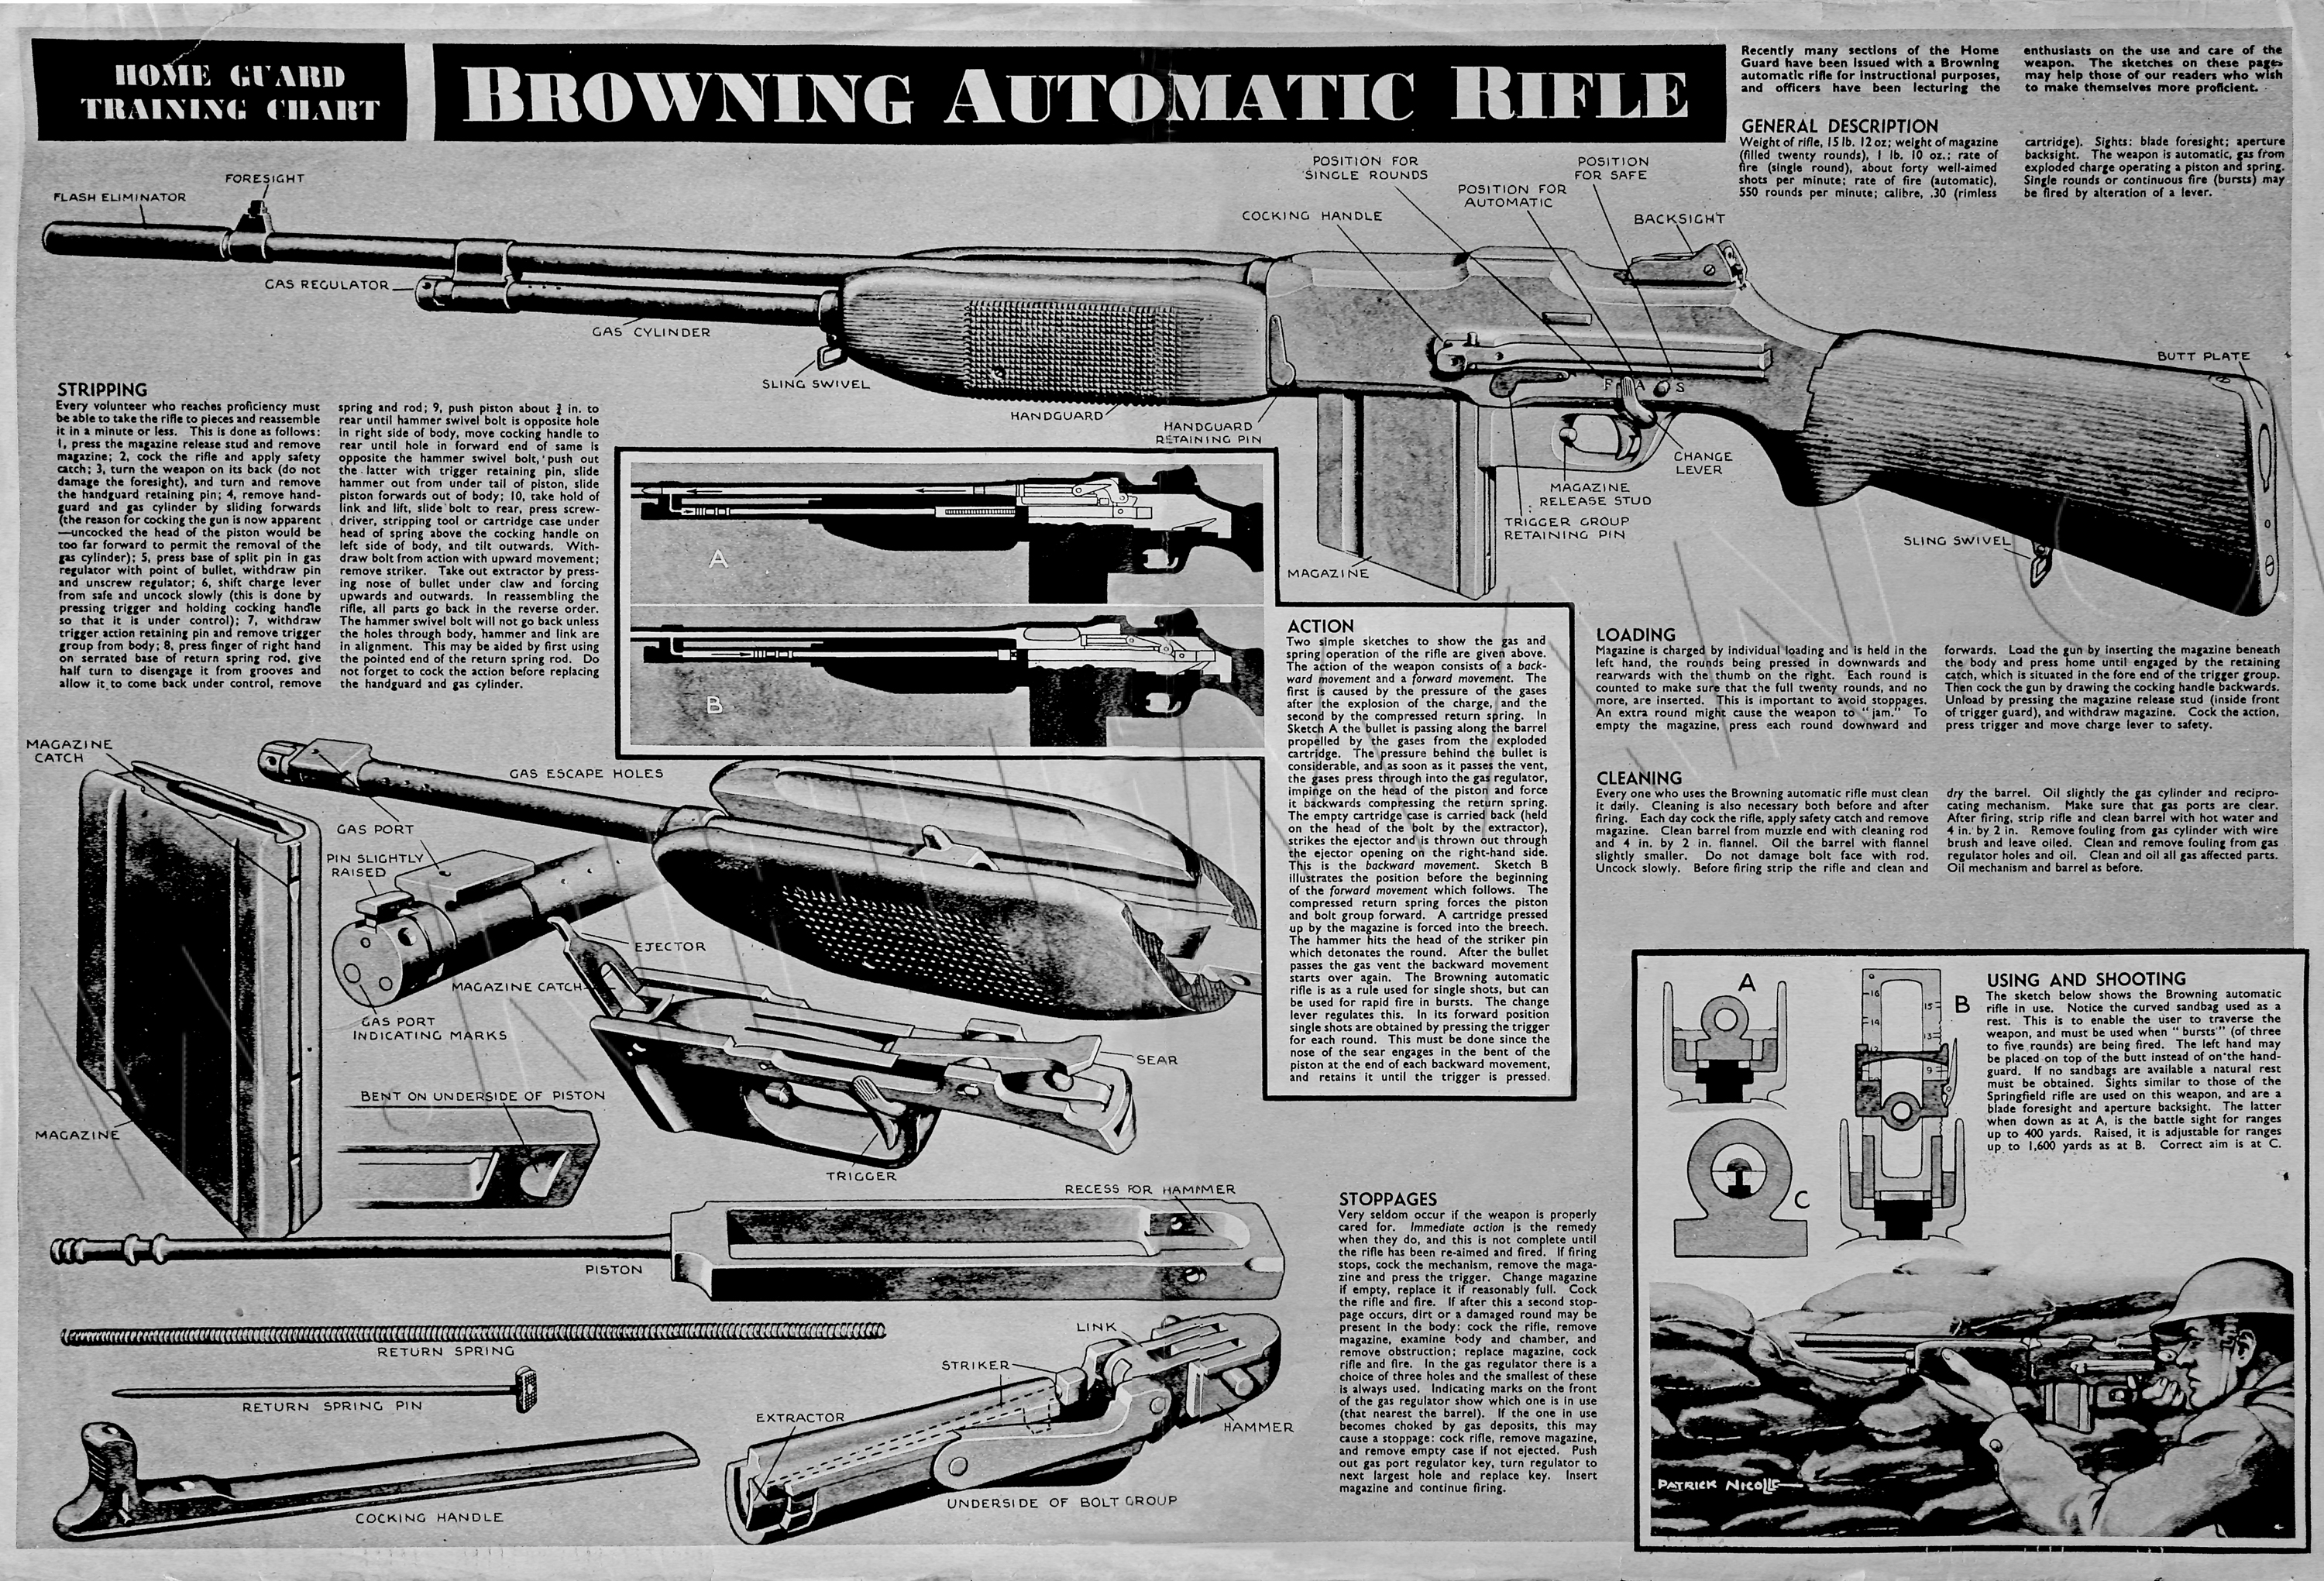 The Americans used shotguns in WW1. What ammo did they use? Did